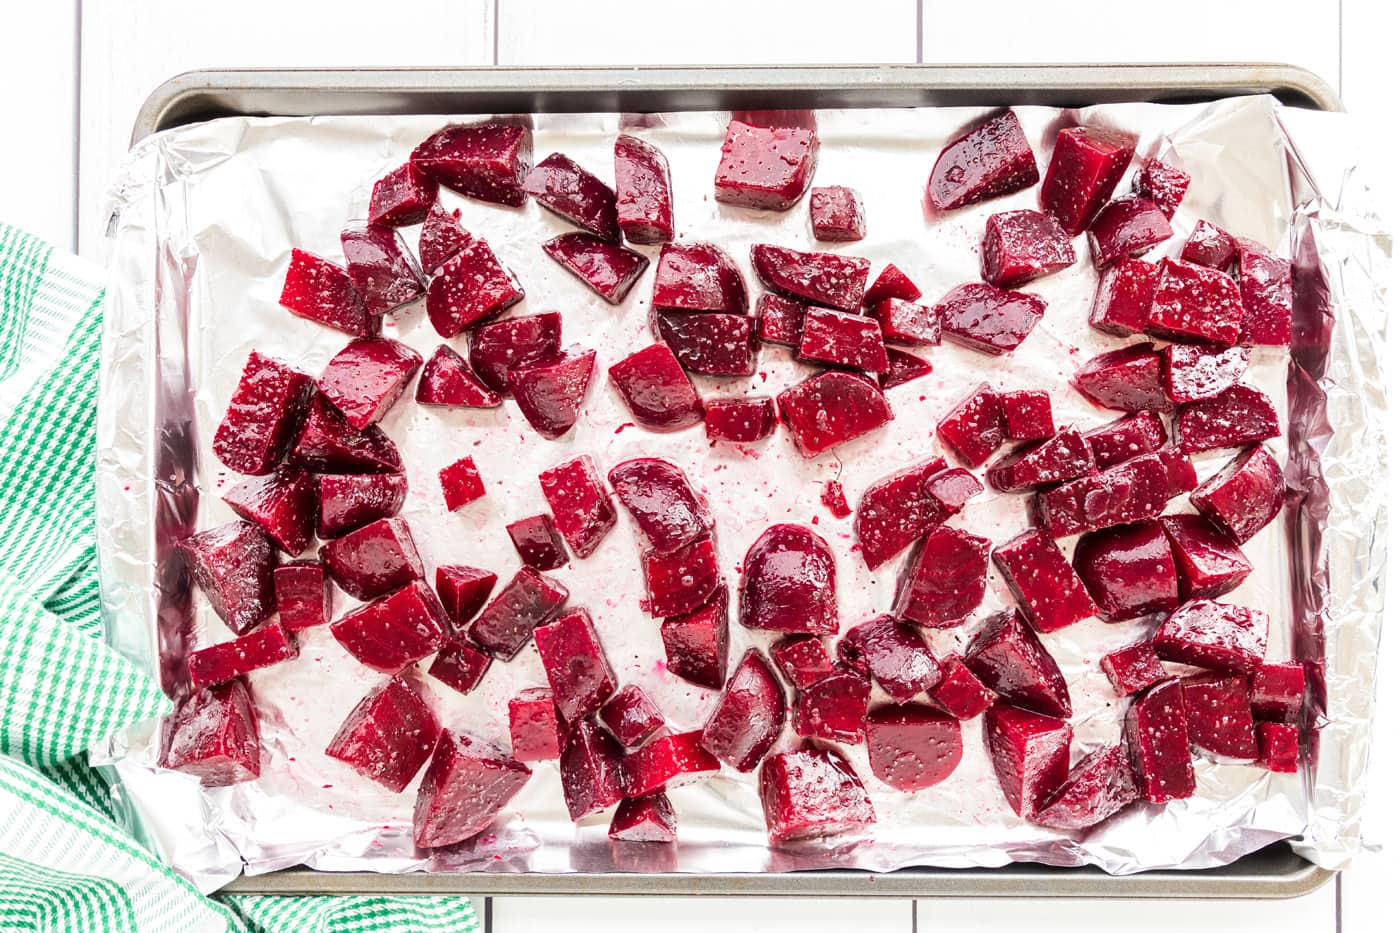 chopped beets on a roasting pan